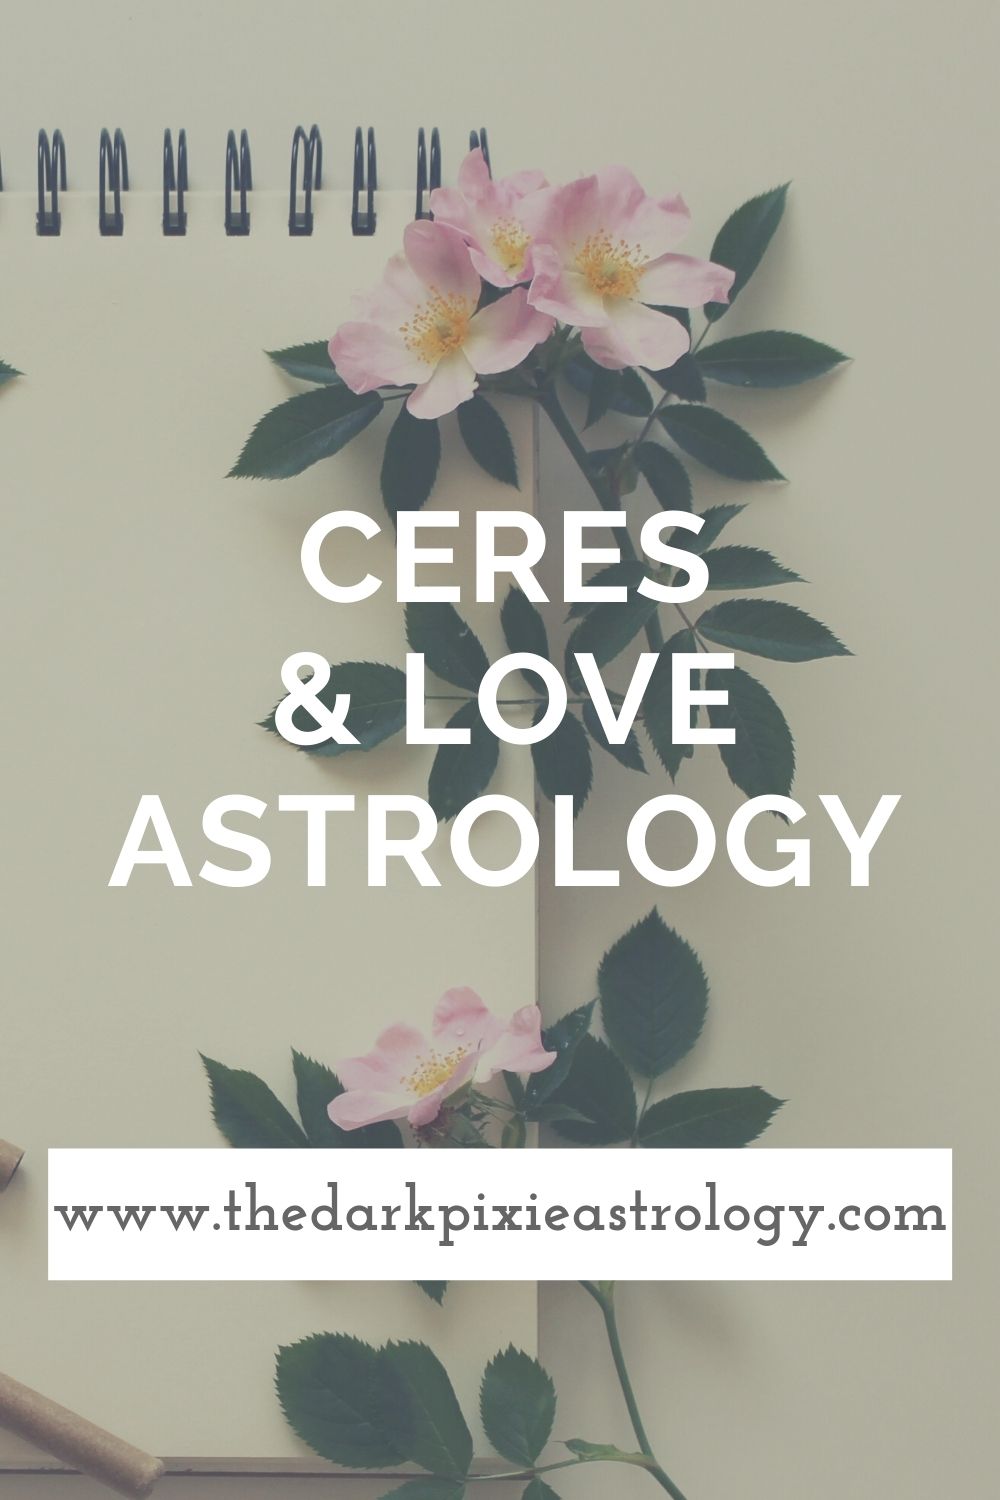 Ceres & Love Astrology - The Dark Pixie Astrology